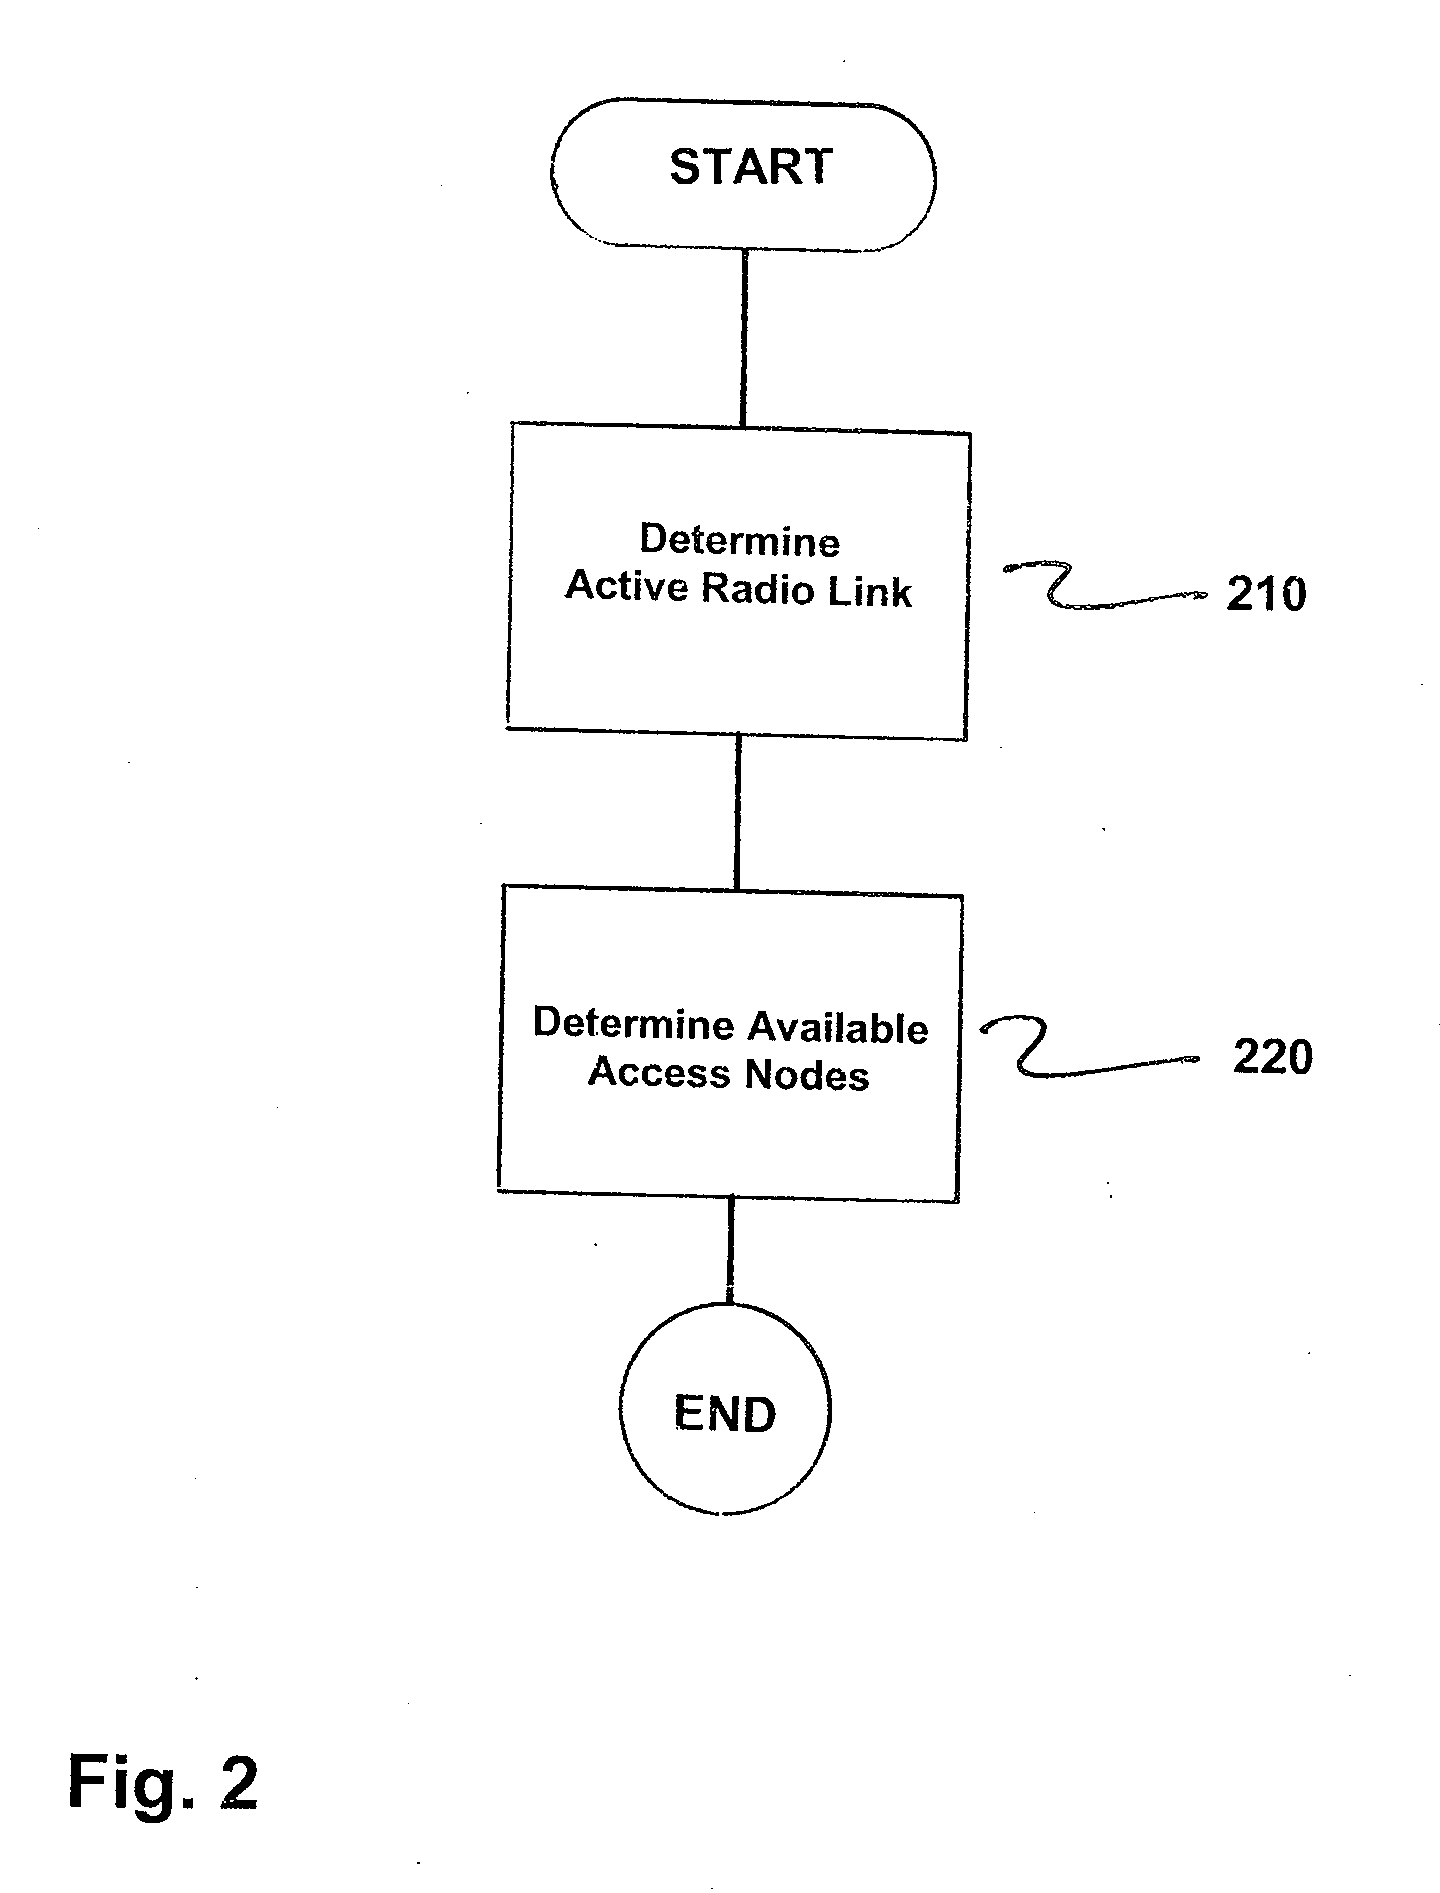 Radio Station System for a Wireless Network